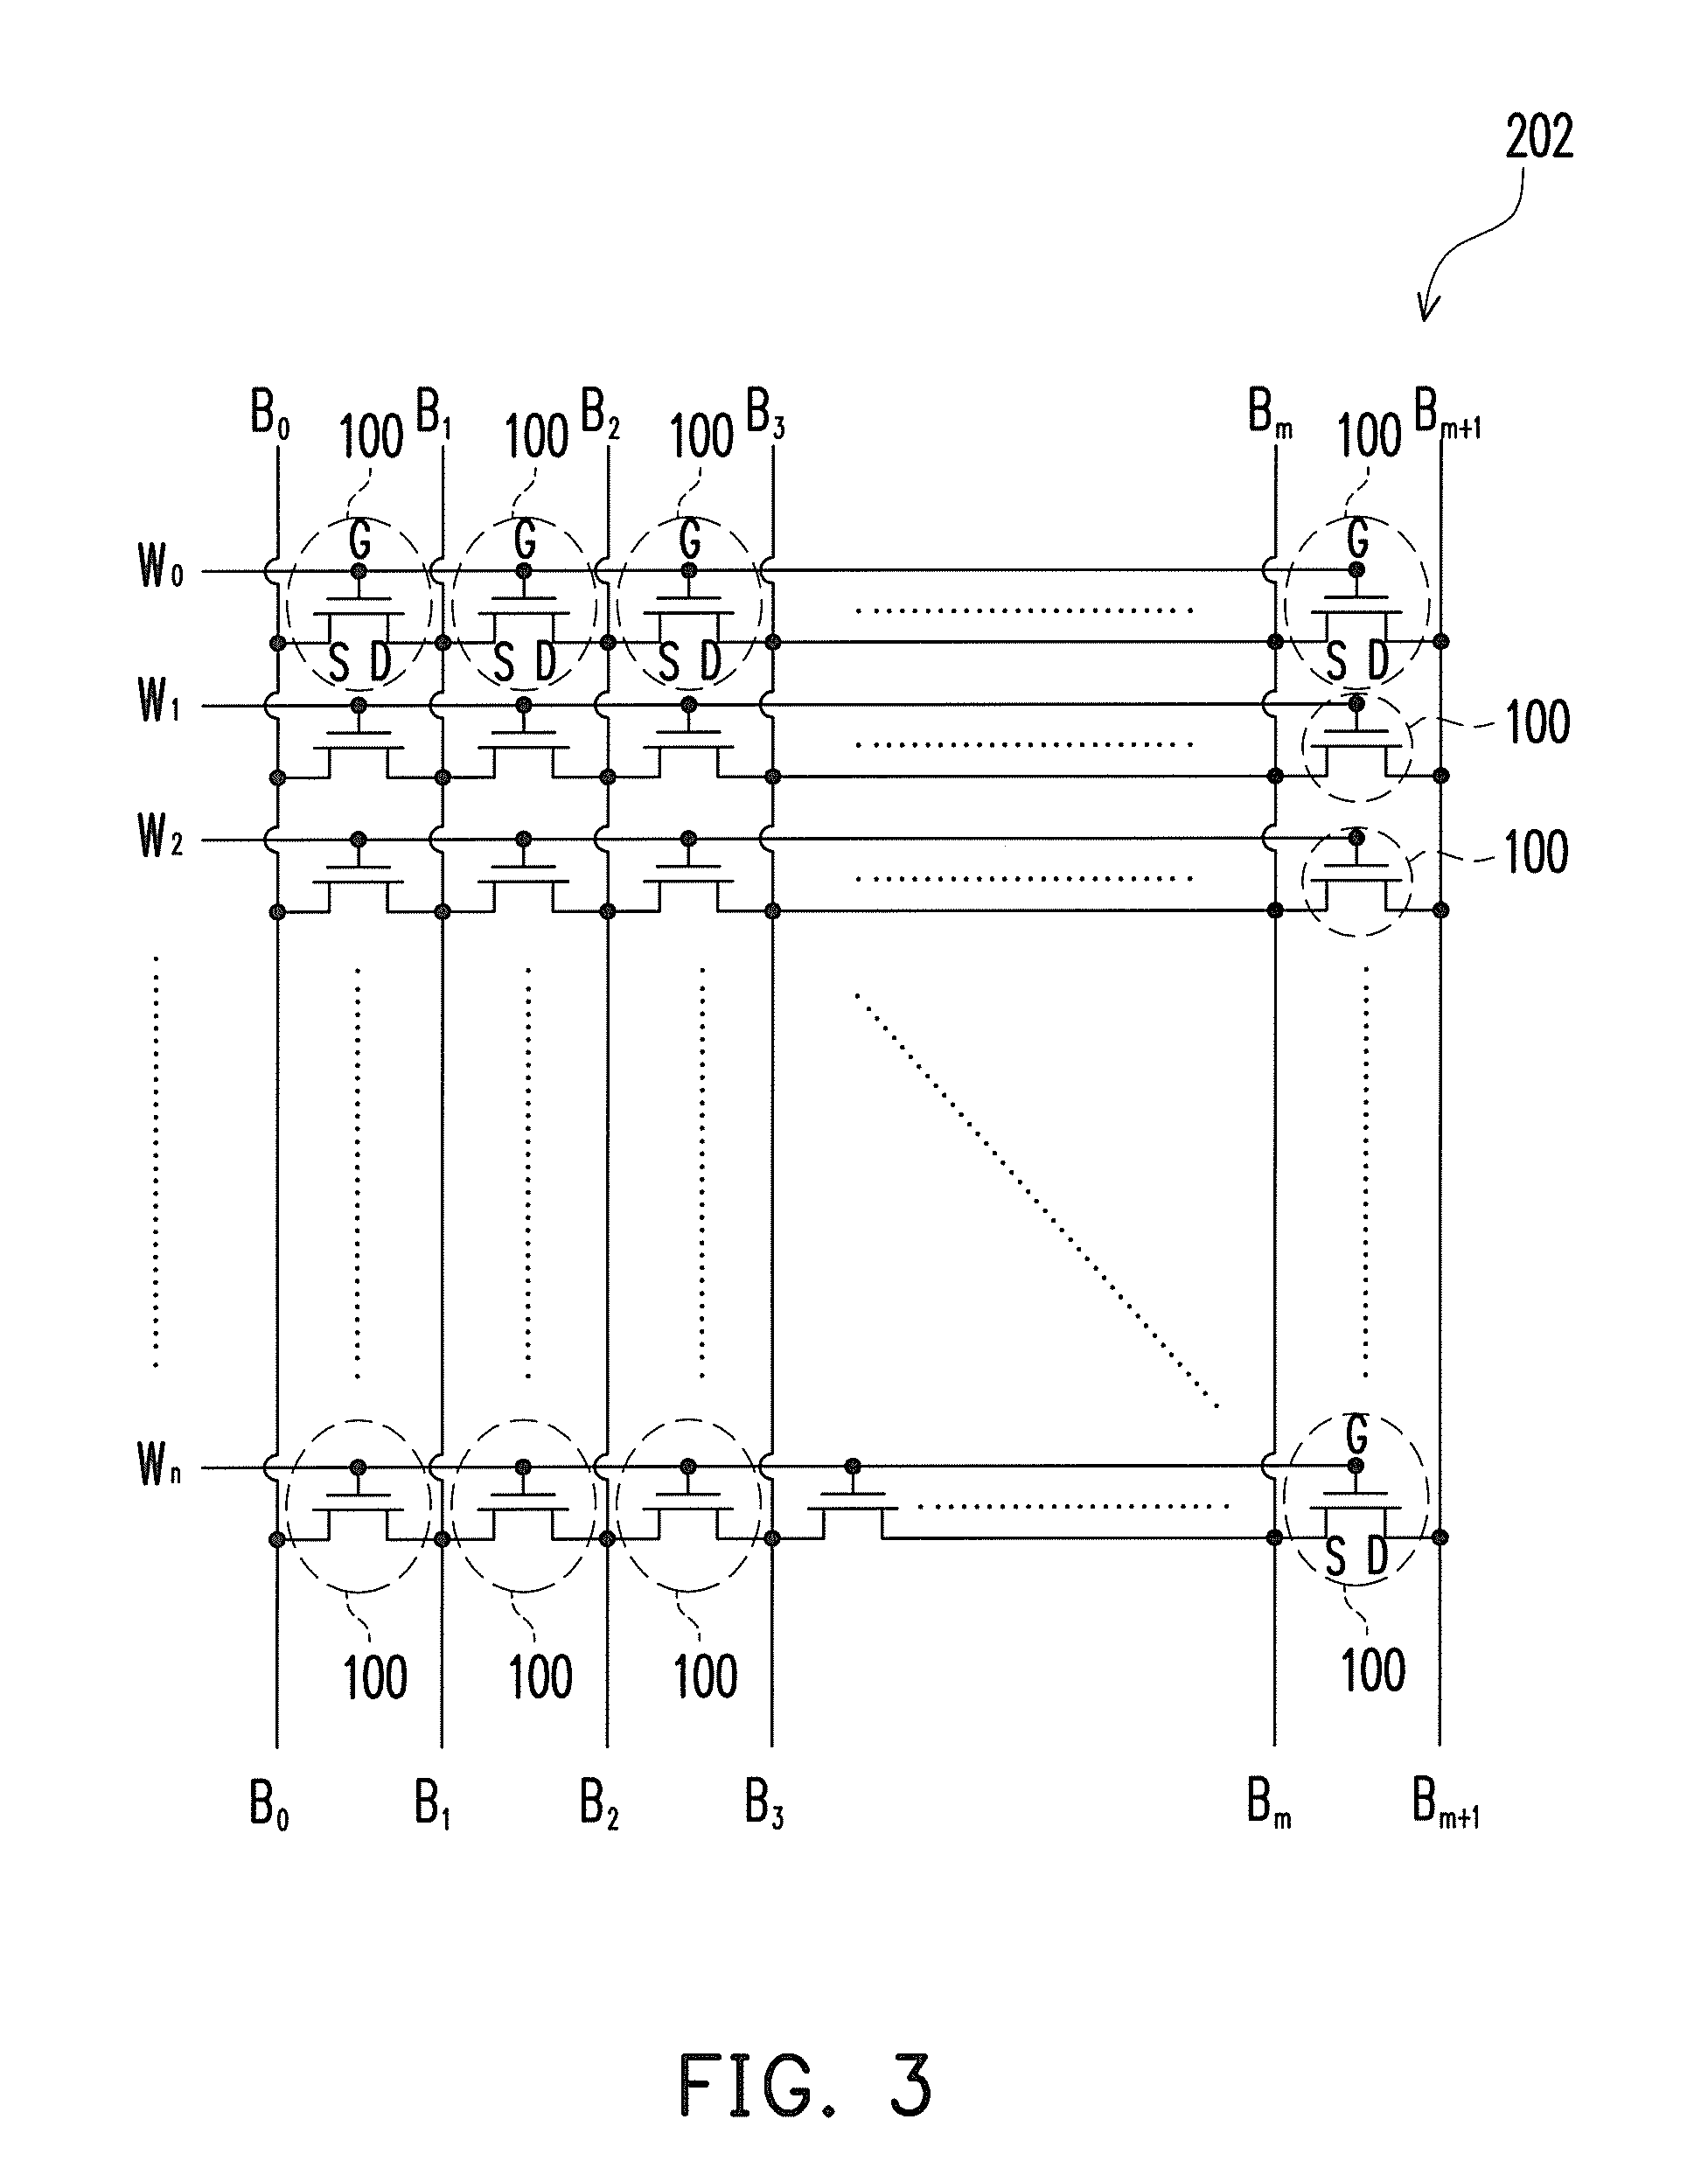 Memory apparatus and method for operating the same